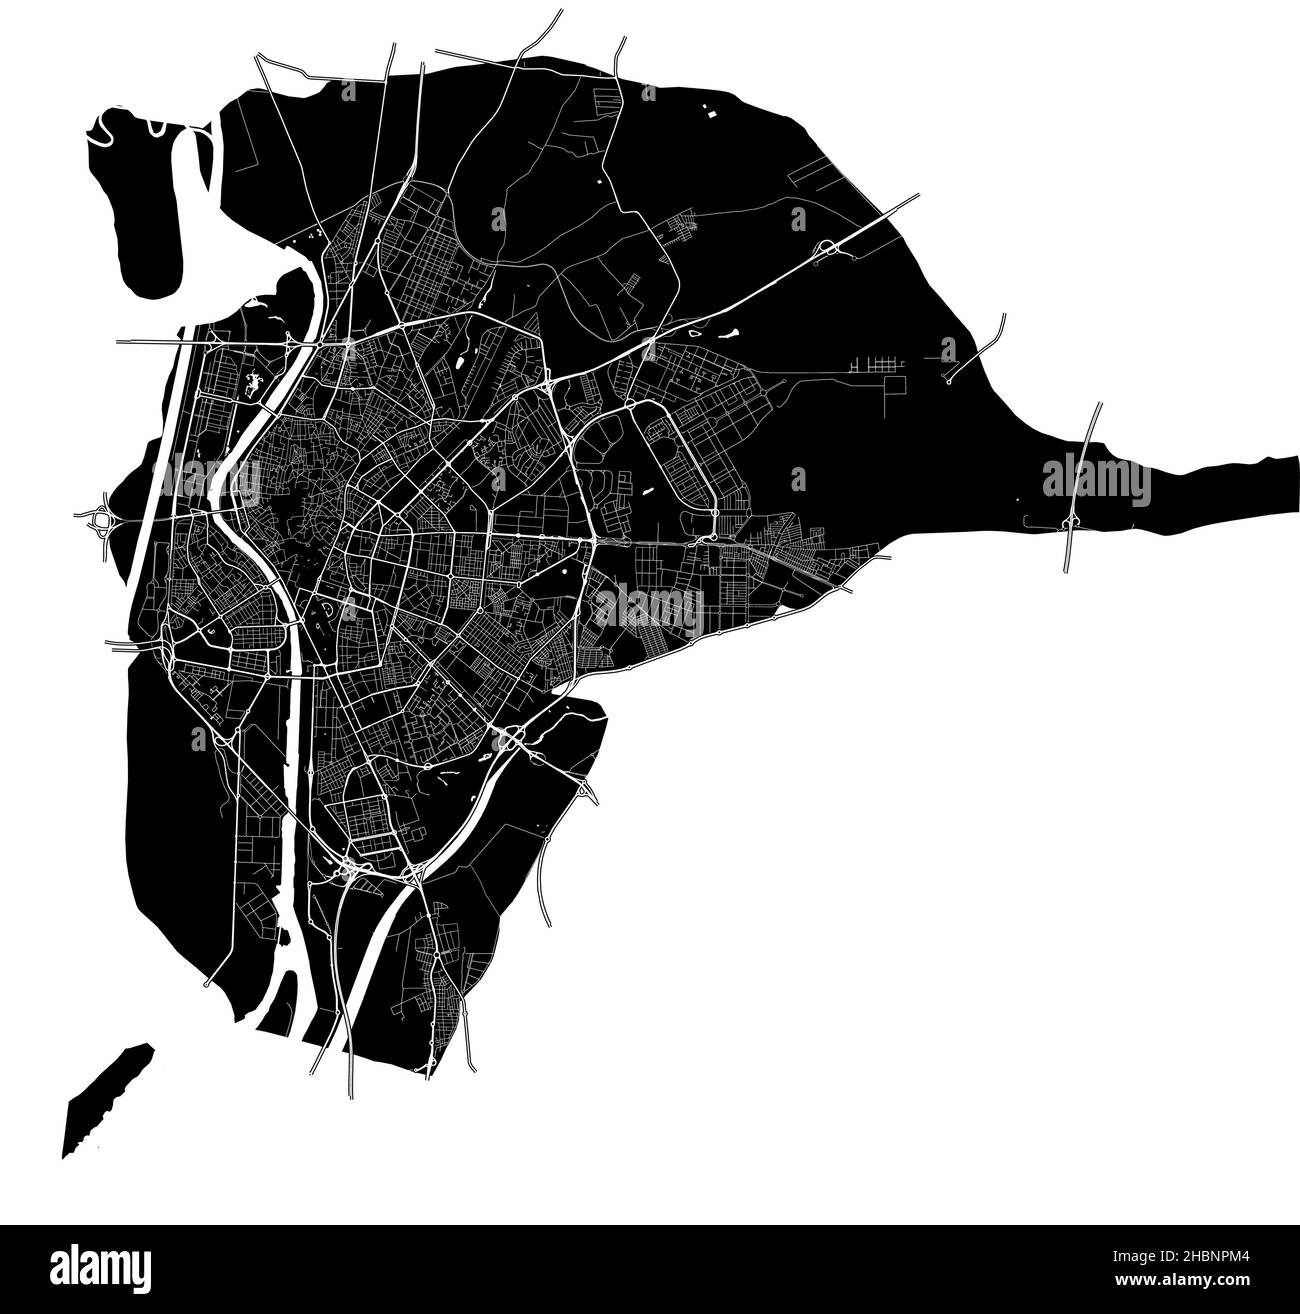 Sevilla Spain High Resolution Vector Map With City Boundaries And